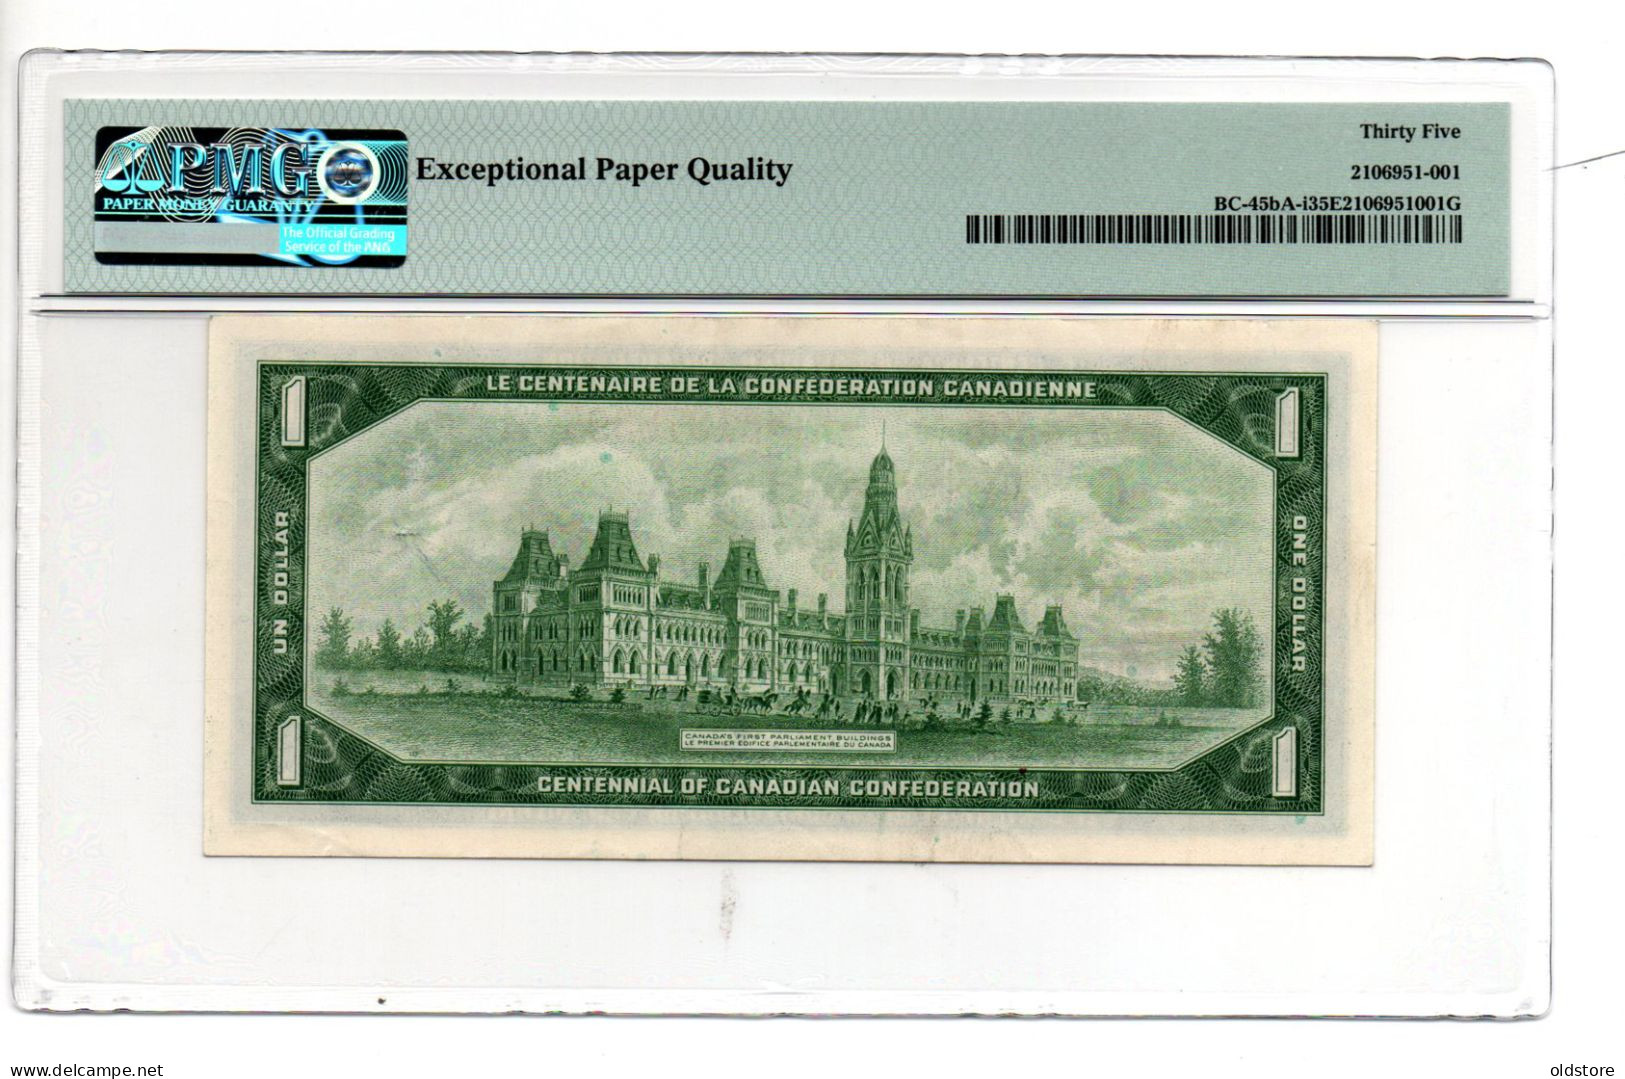 Canada Banknote - 1 Dollar - REPLACEMENT - ND 1967 - VF 35 EPQ - Canada